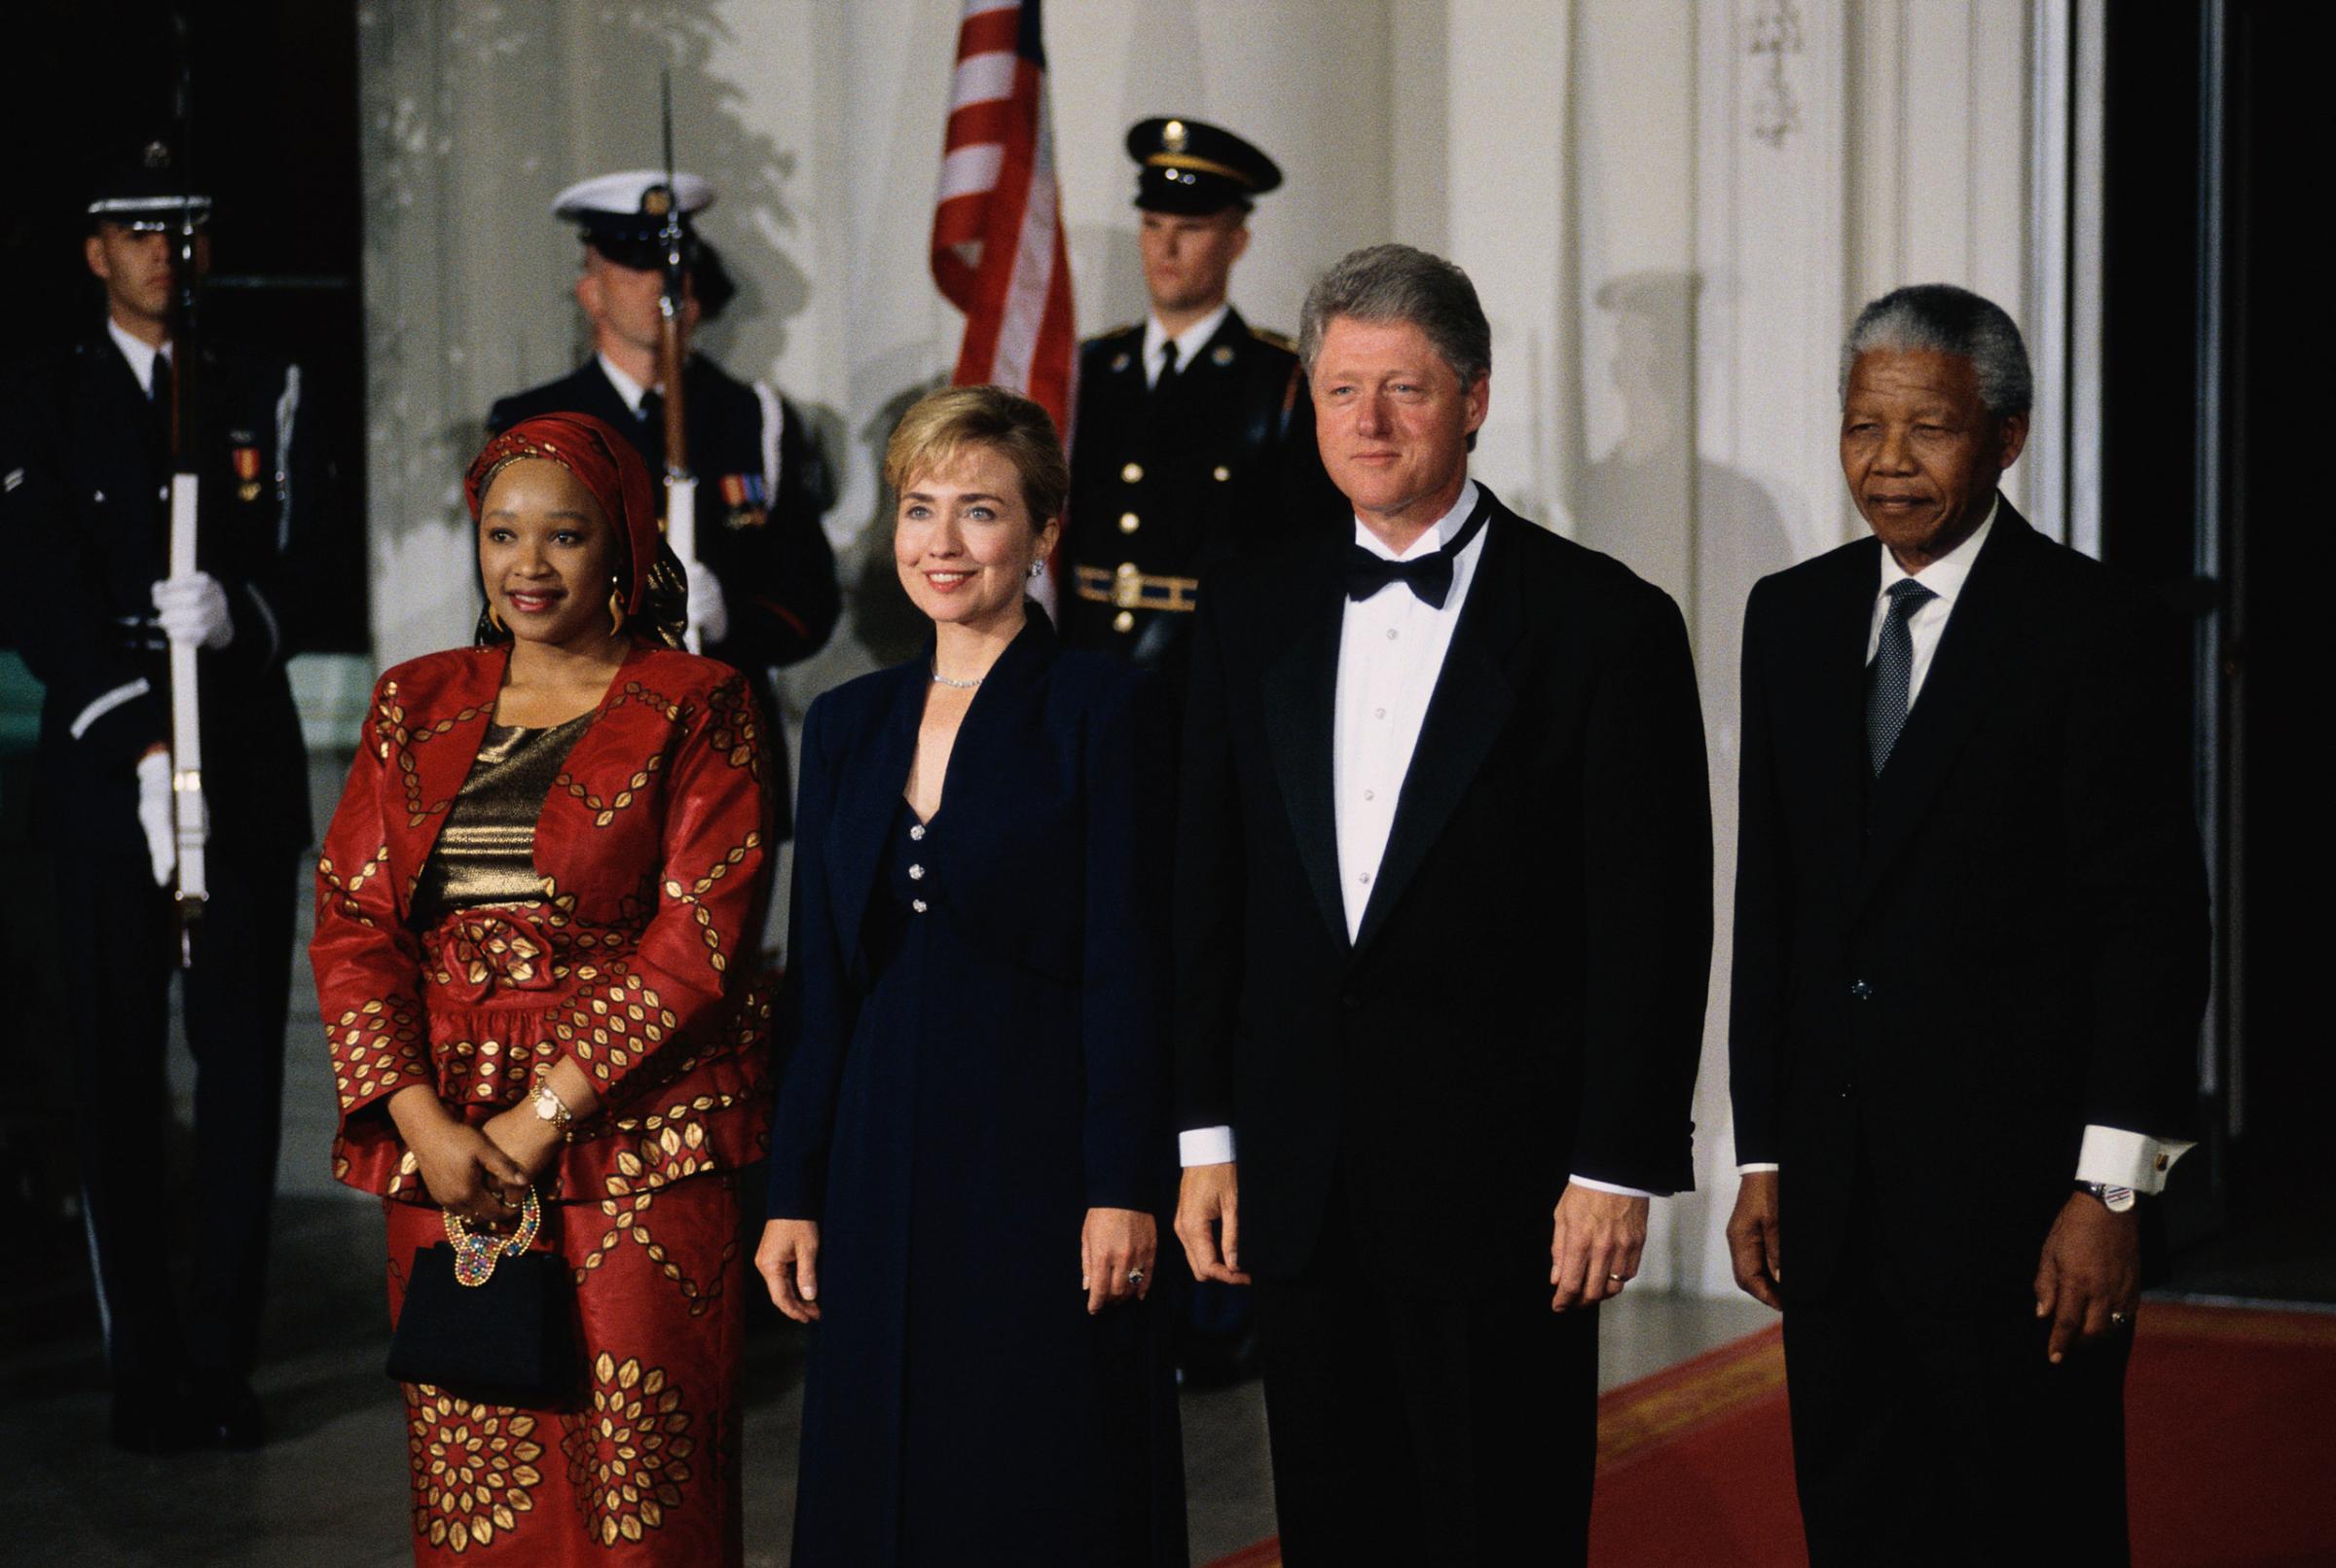 Clintons with Nelson Mandela at State Dinner